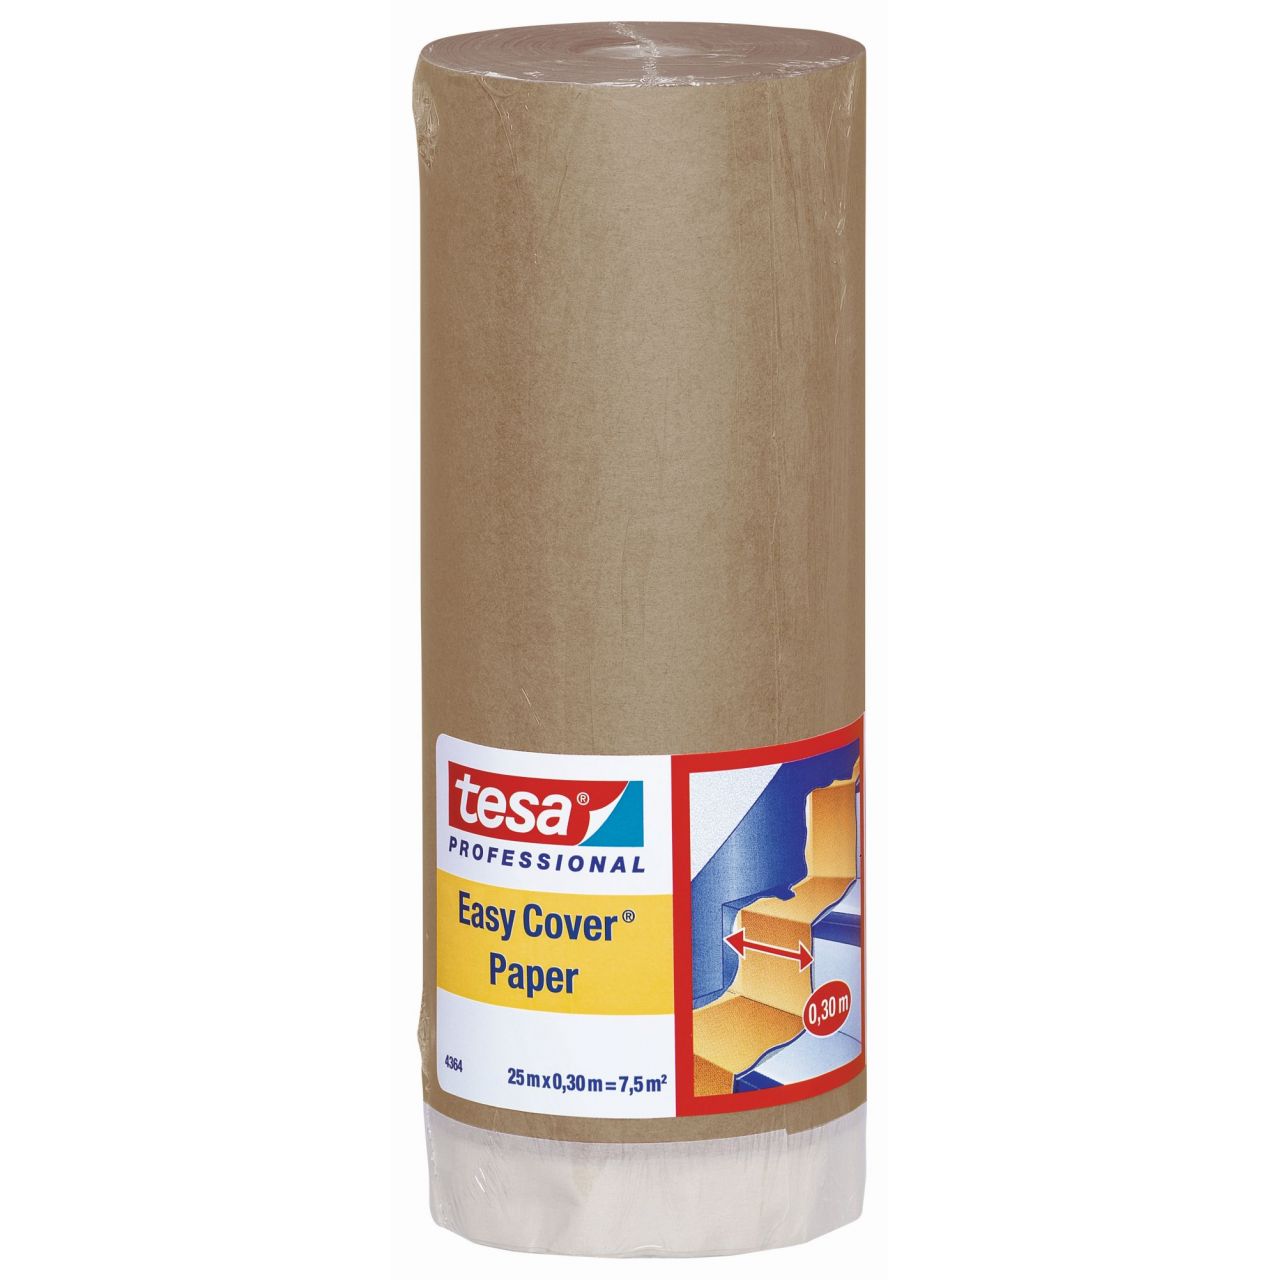 tesa 4364 Easy Cover Papel, 25m x 300mm